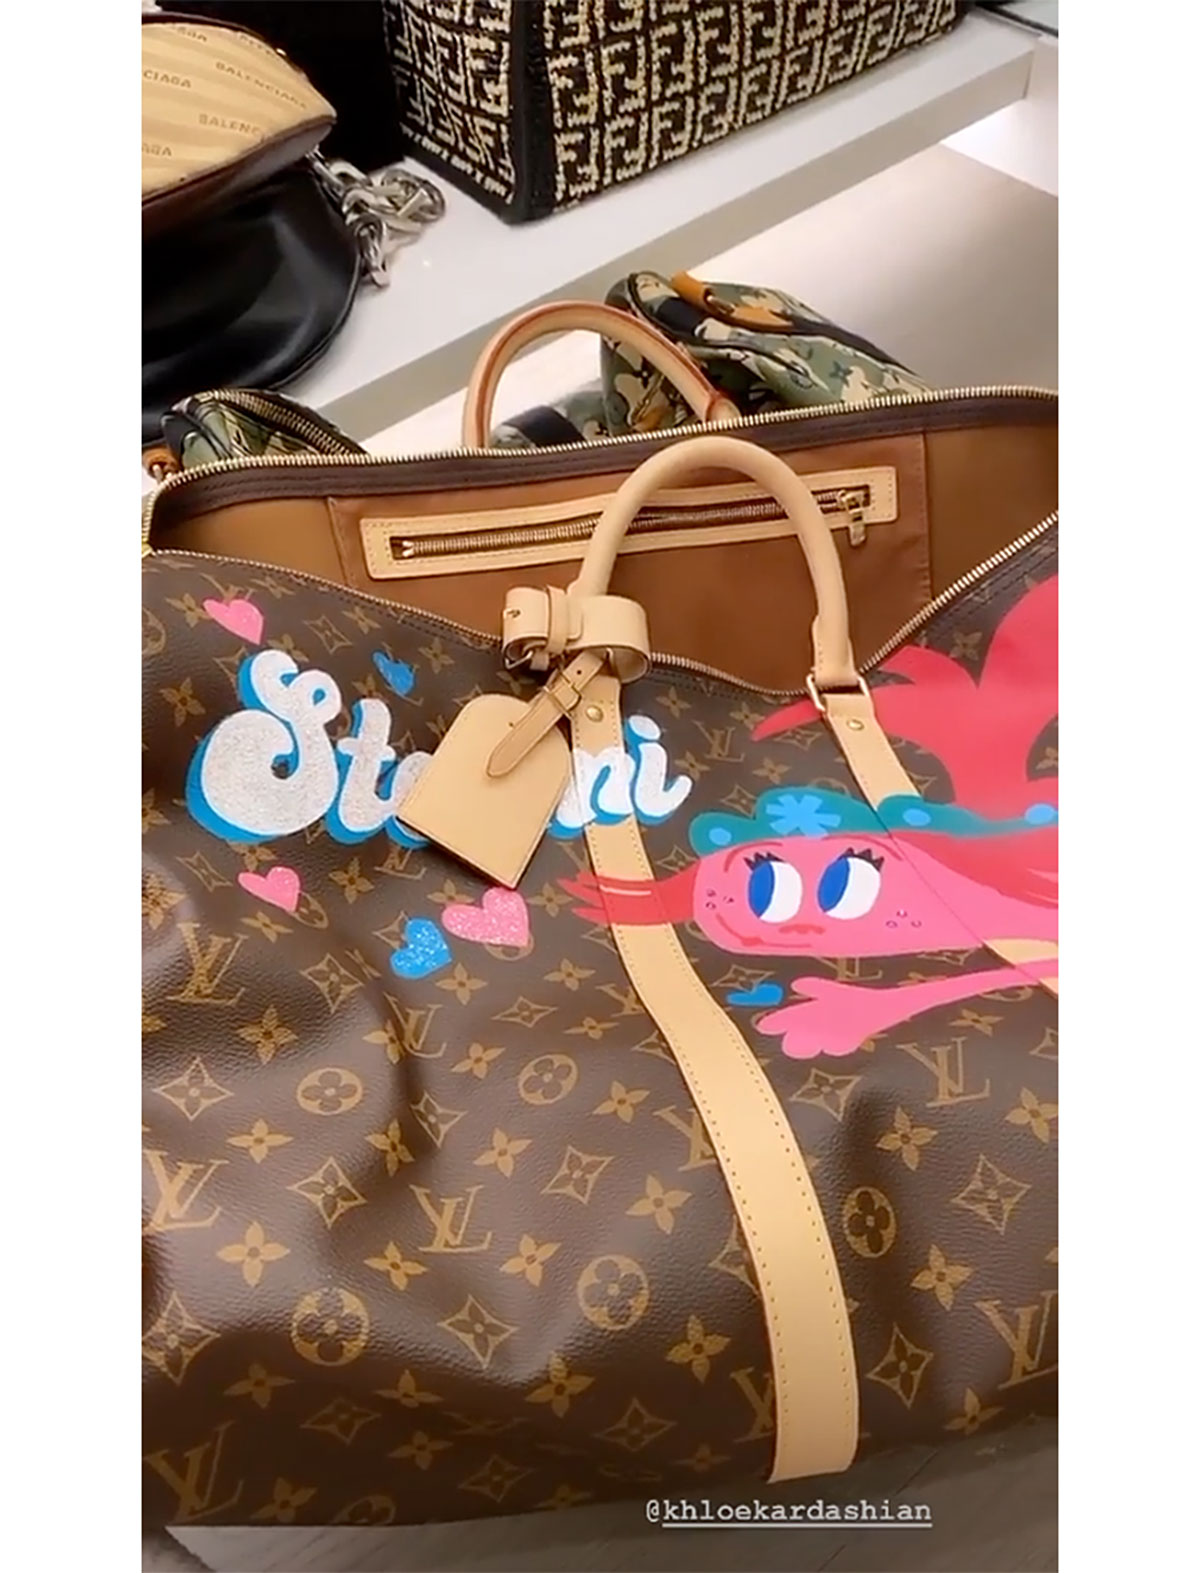 Lala Kent buys Louis Vuitton bag for 1-year-old daughter's birthday